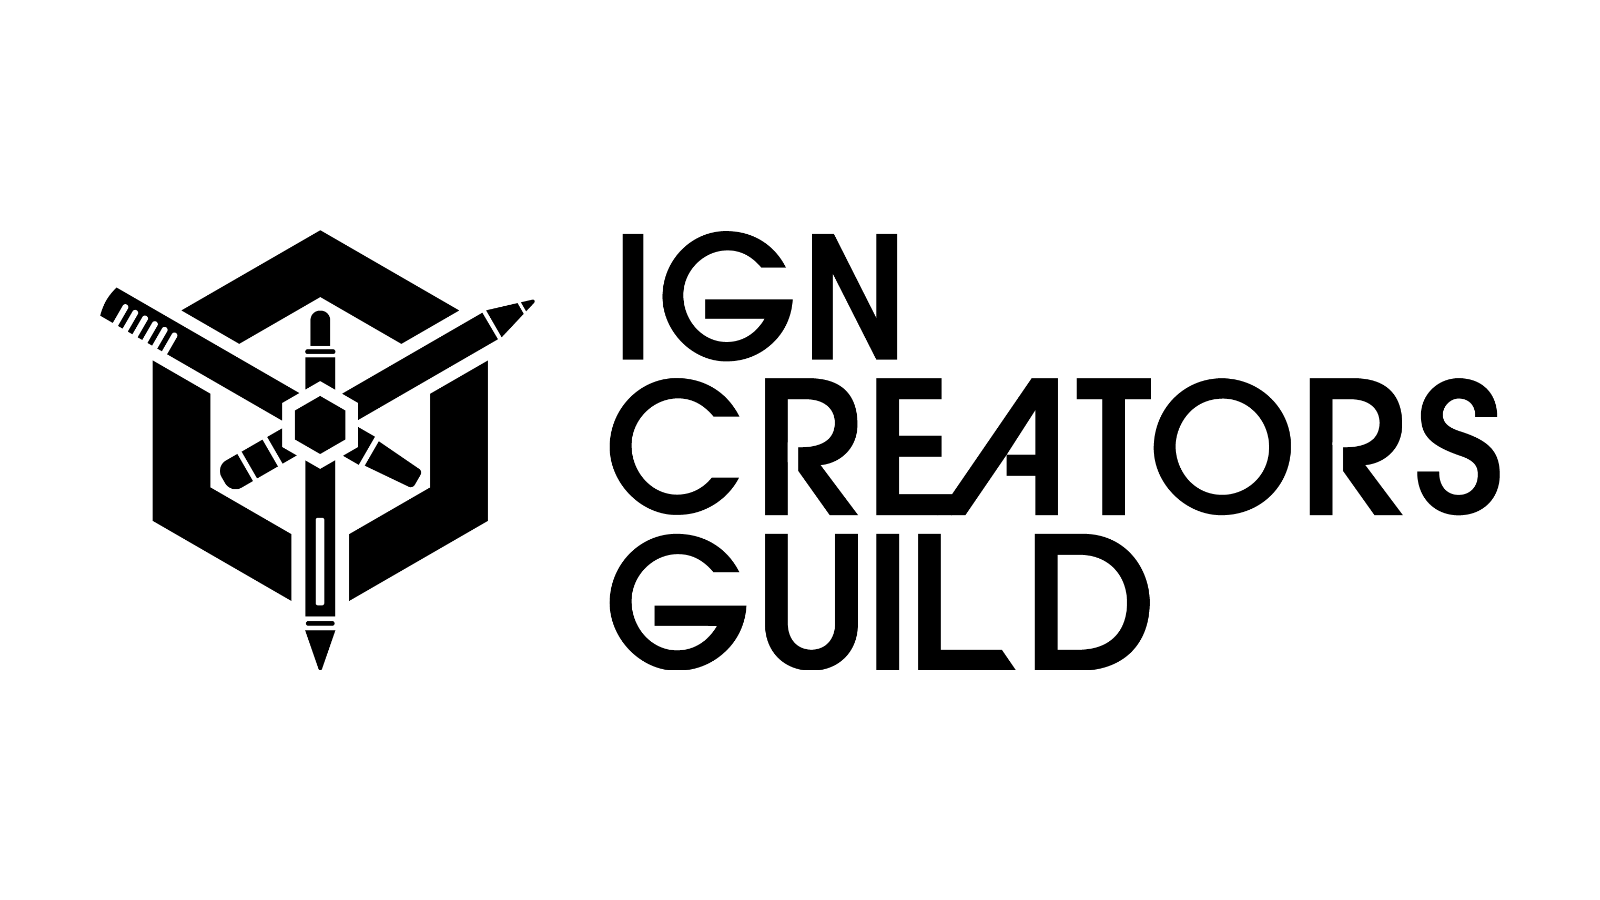 the logo of the IGN creators guild